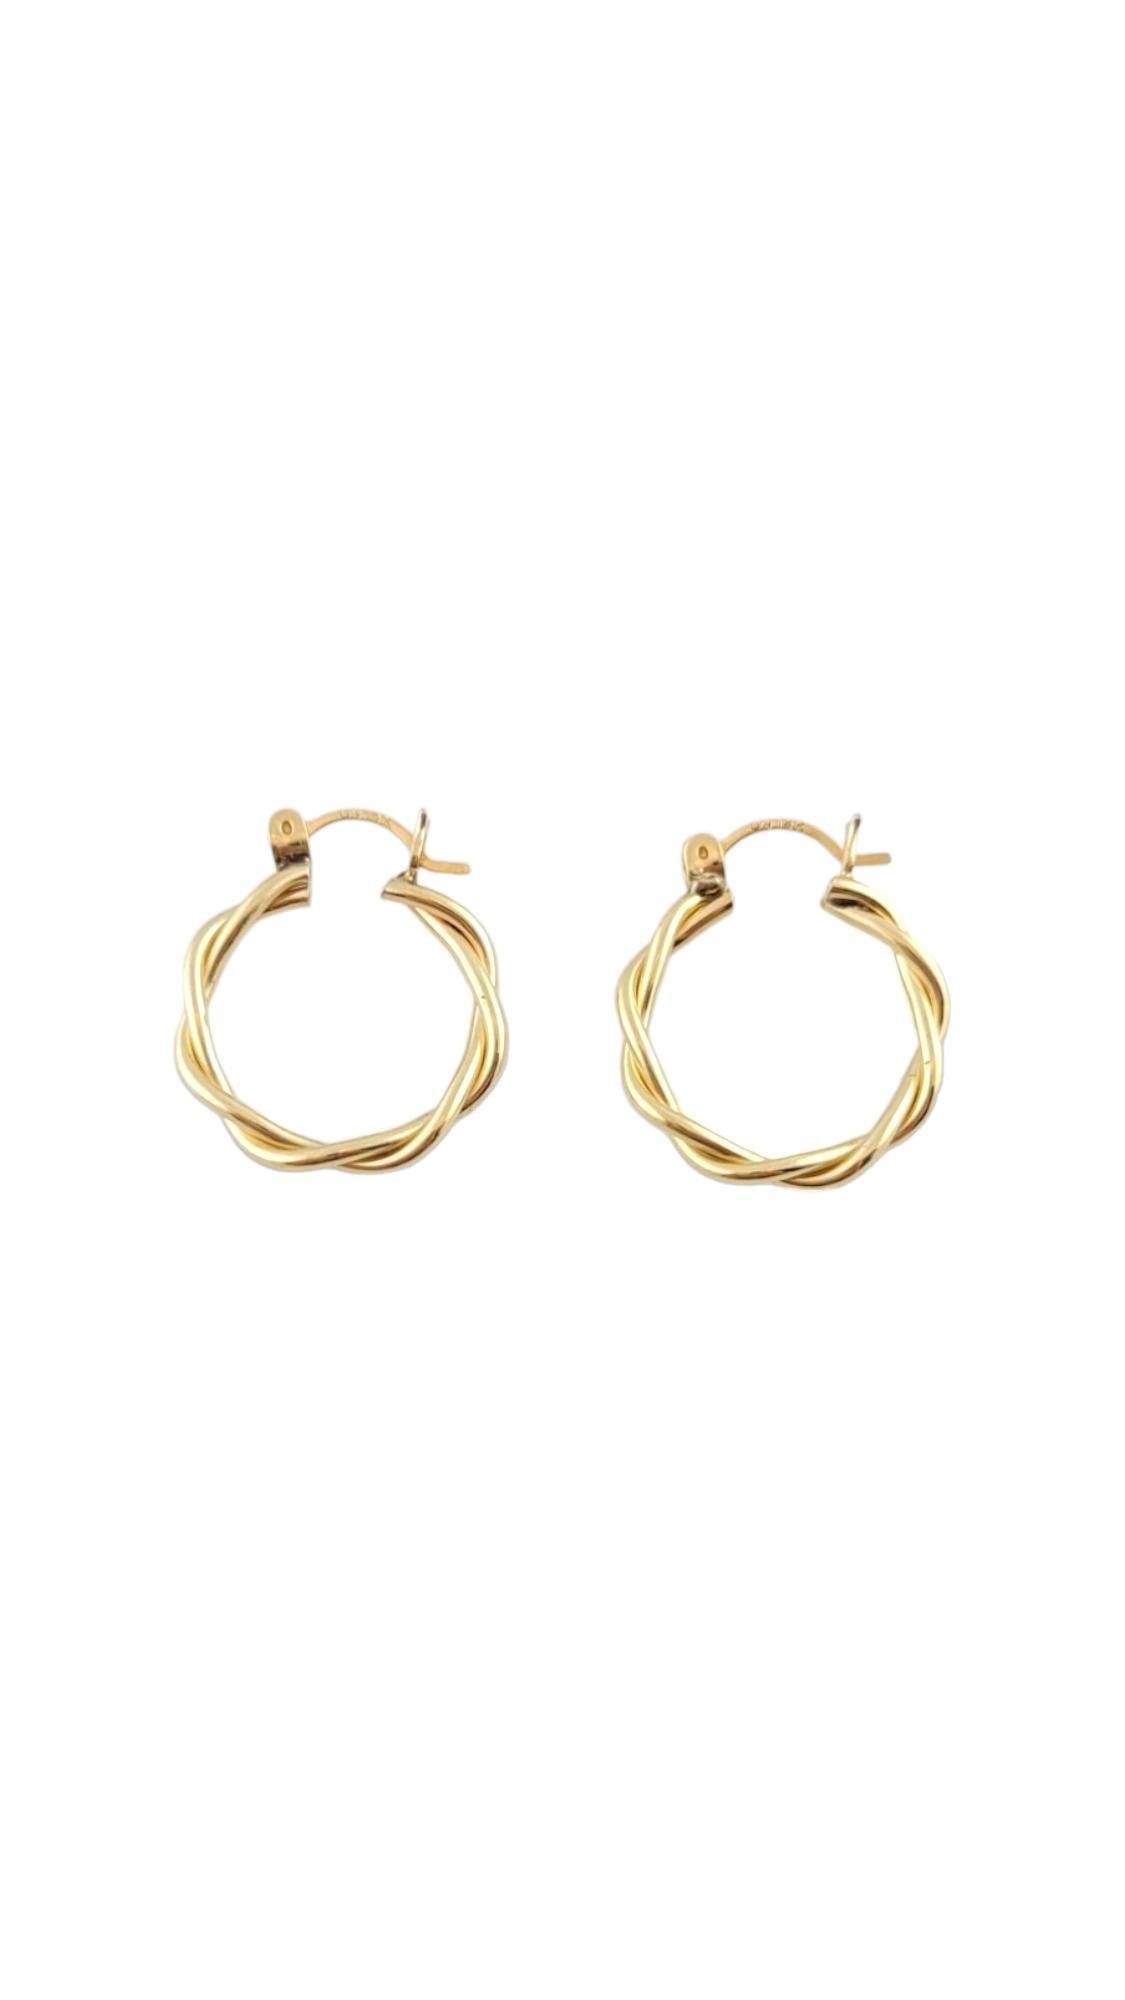 Vintage 14K Yellow Gold Twist Hoops

14 Karat yellow gold hoops with a twist design.

Size: 18.7 mm 

Approximately 2.4 mm thick.

Weight: 1.4 dwt/2.2 gr

Hallmark: UN 14K

Very good condition, professionally polished.

Will come packaged in a gift